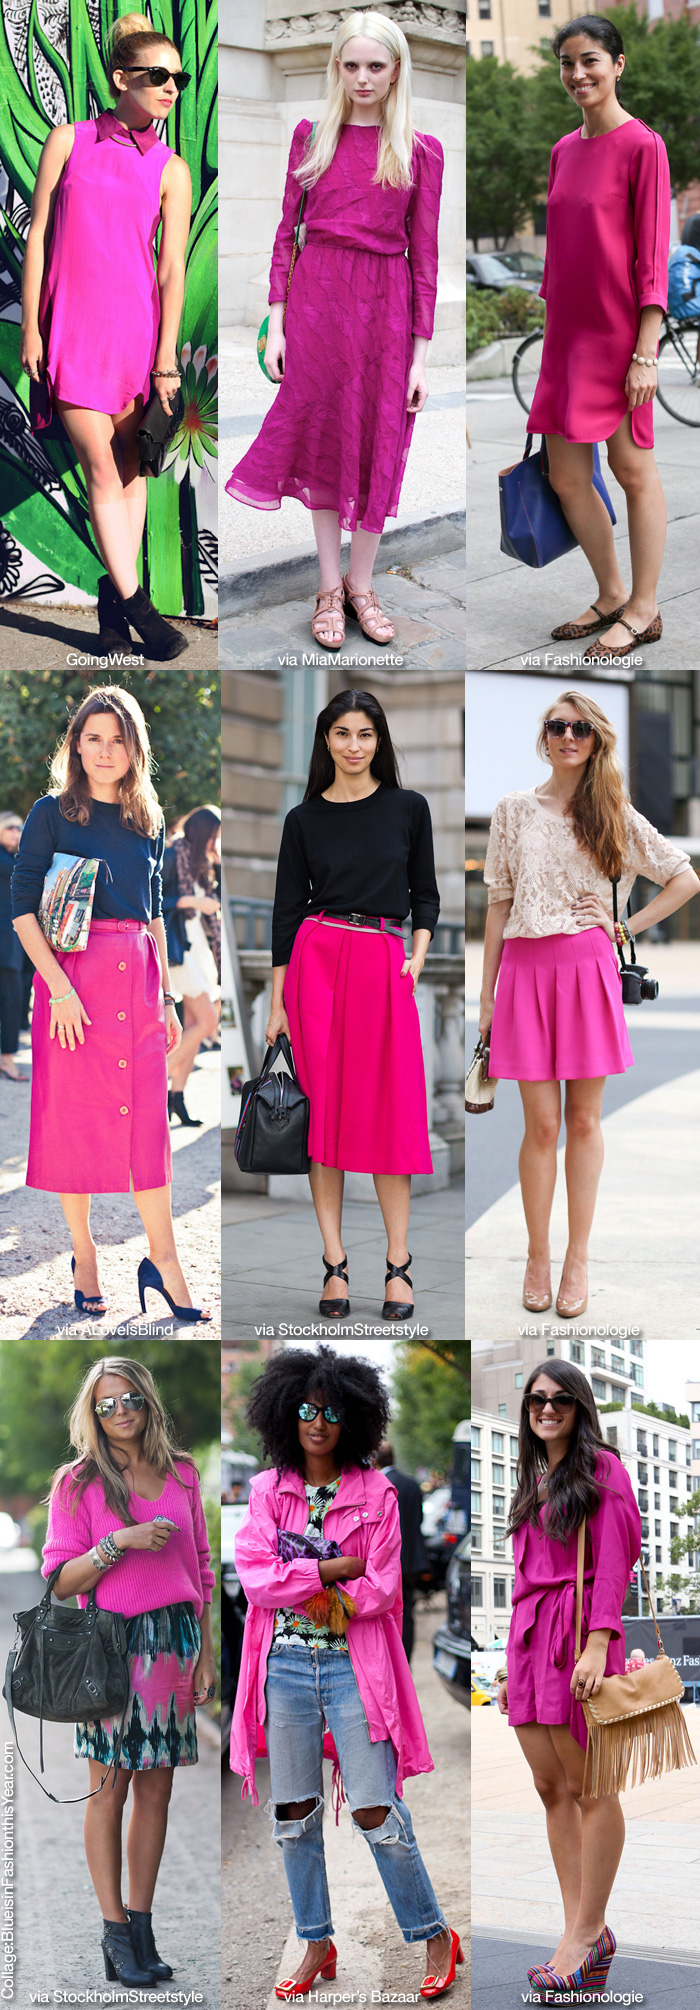 How To Wear Neon Pink - Blue is in Fashion this Year